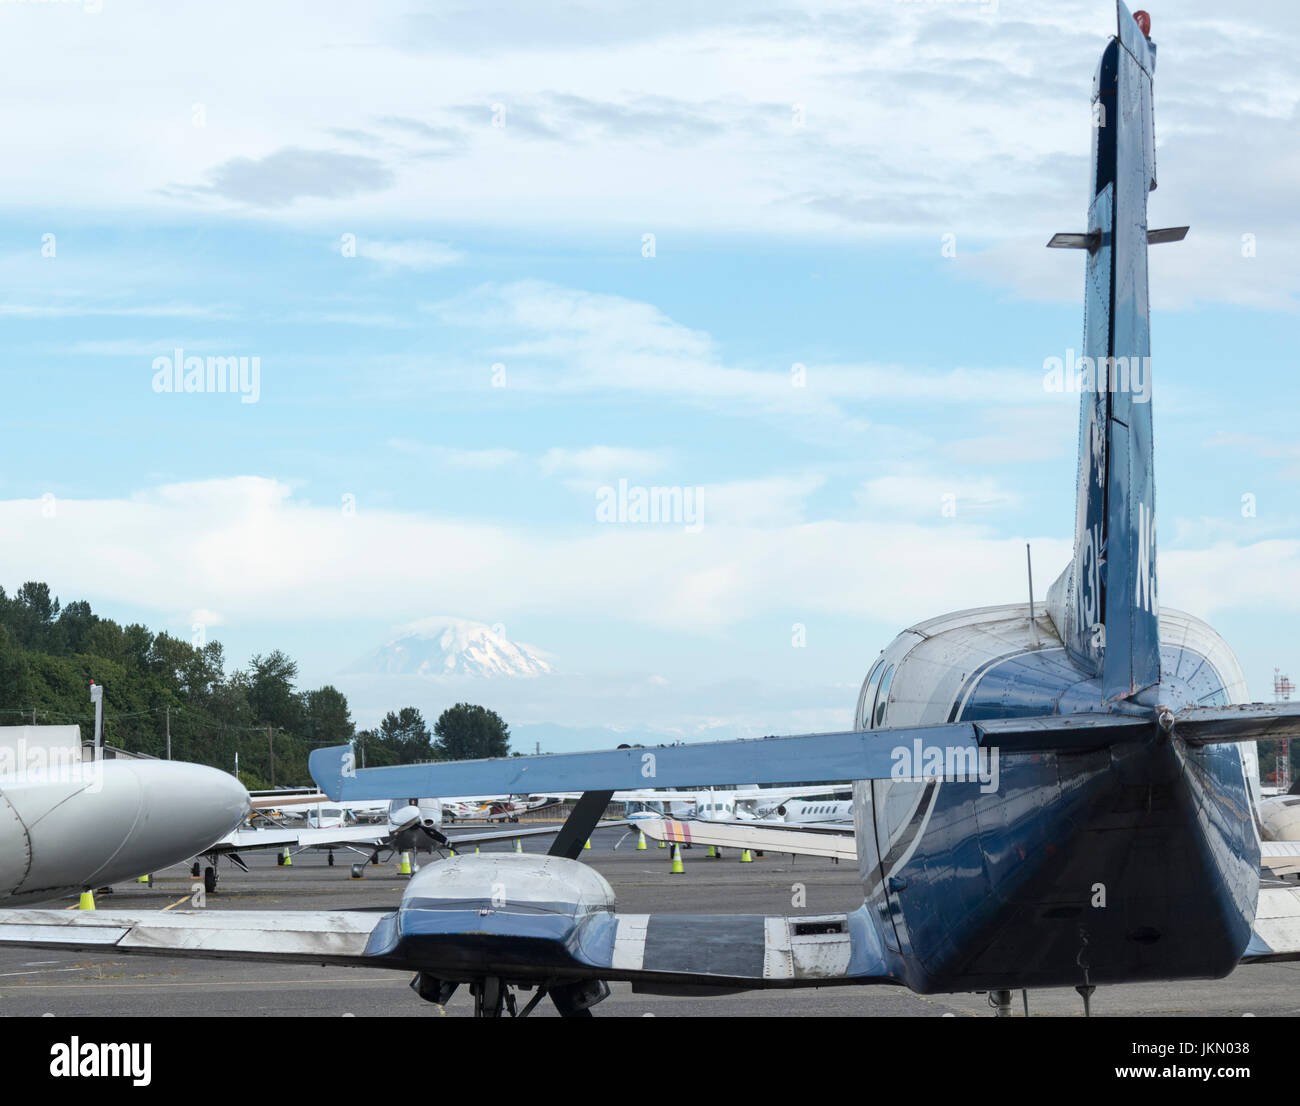 parked aircraft on Boeing Field, King County International Airport, Seattle, Washington State, USA Stock Photo